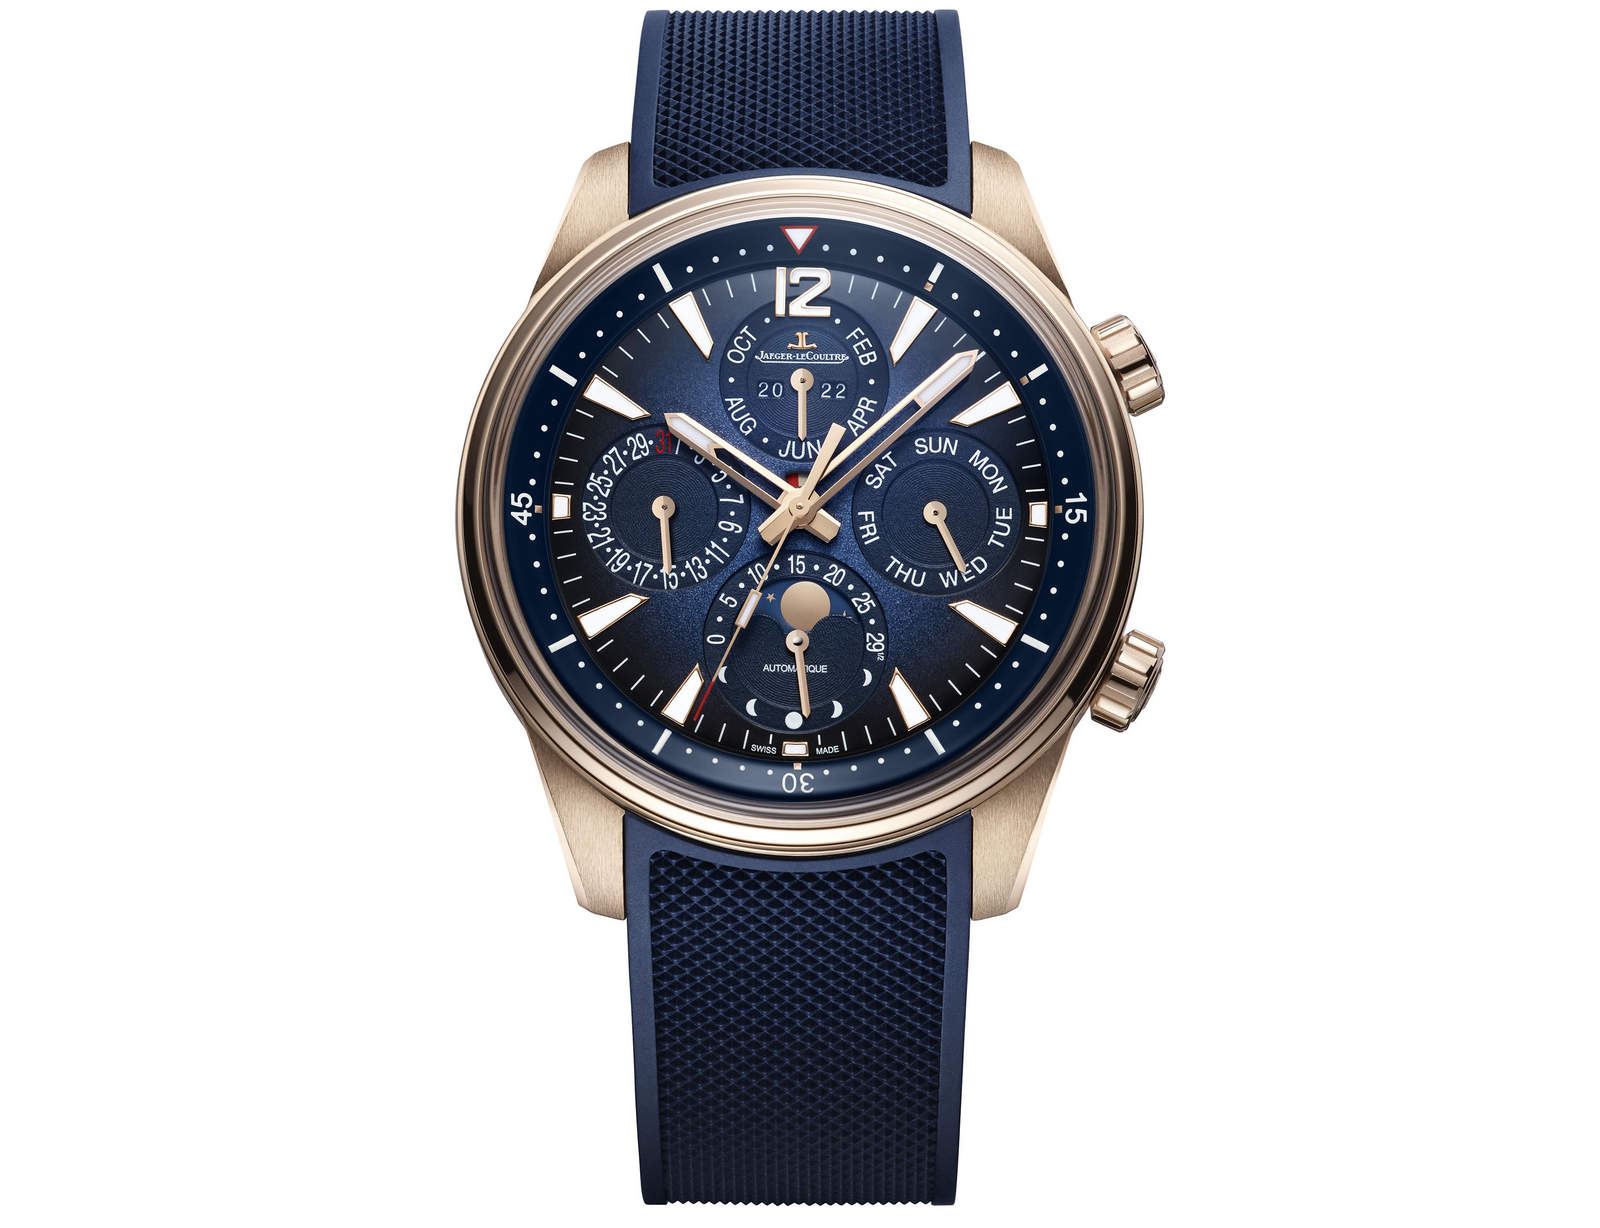 Jaeger-LeCoultre?s newest Polaris timepiece is the first in the collection to feature a perpetual calendar complication